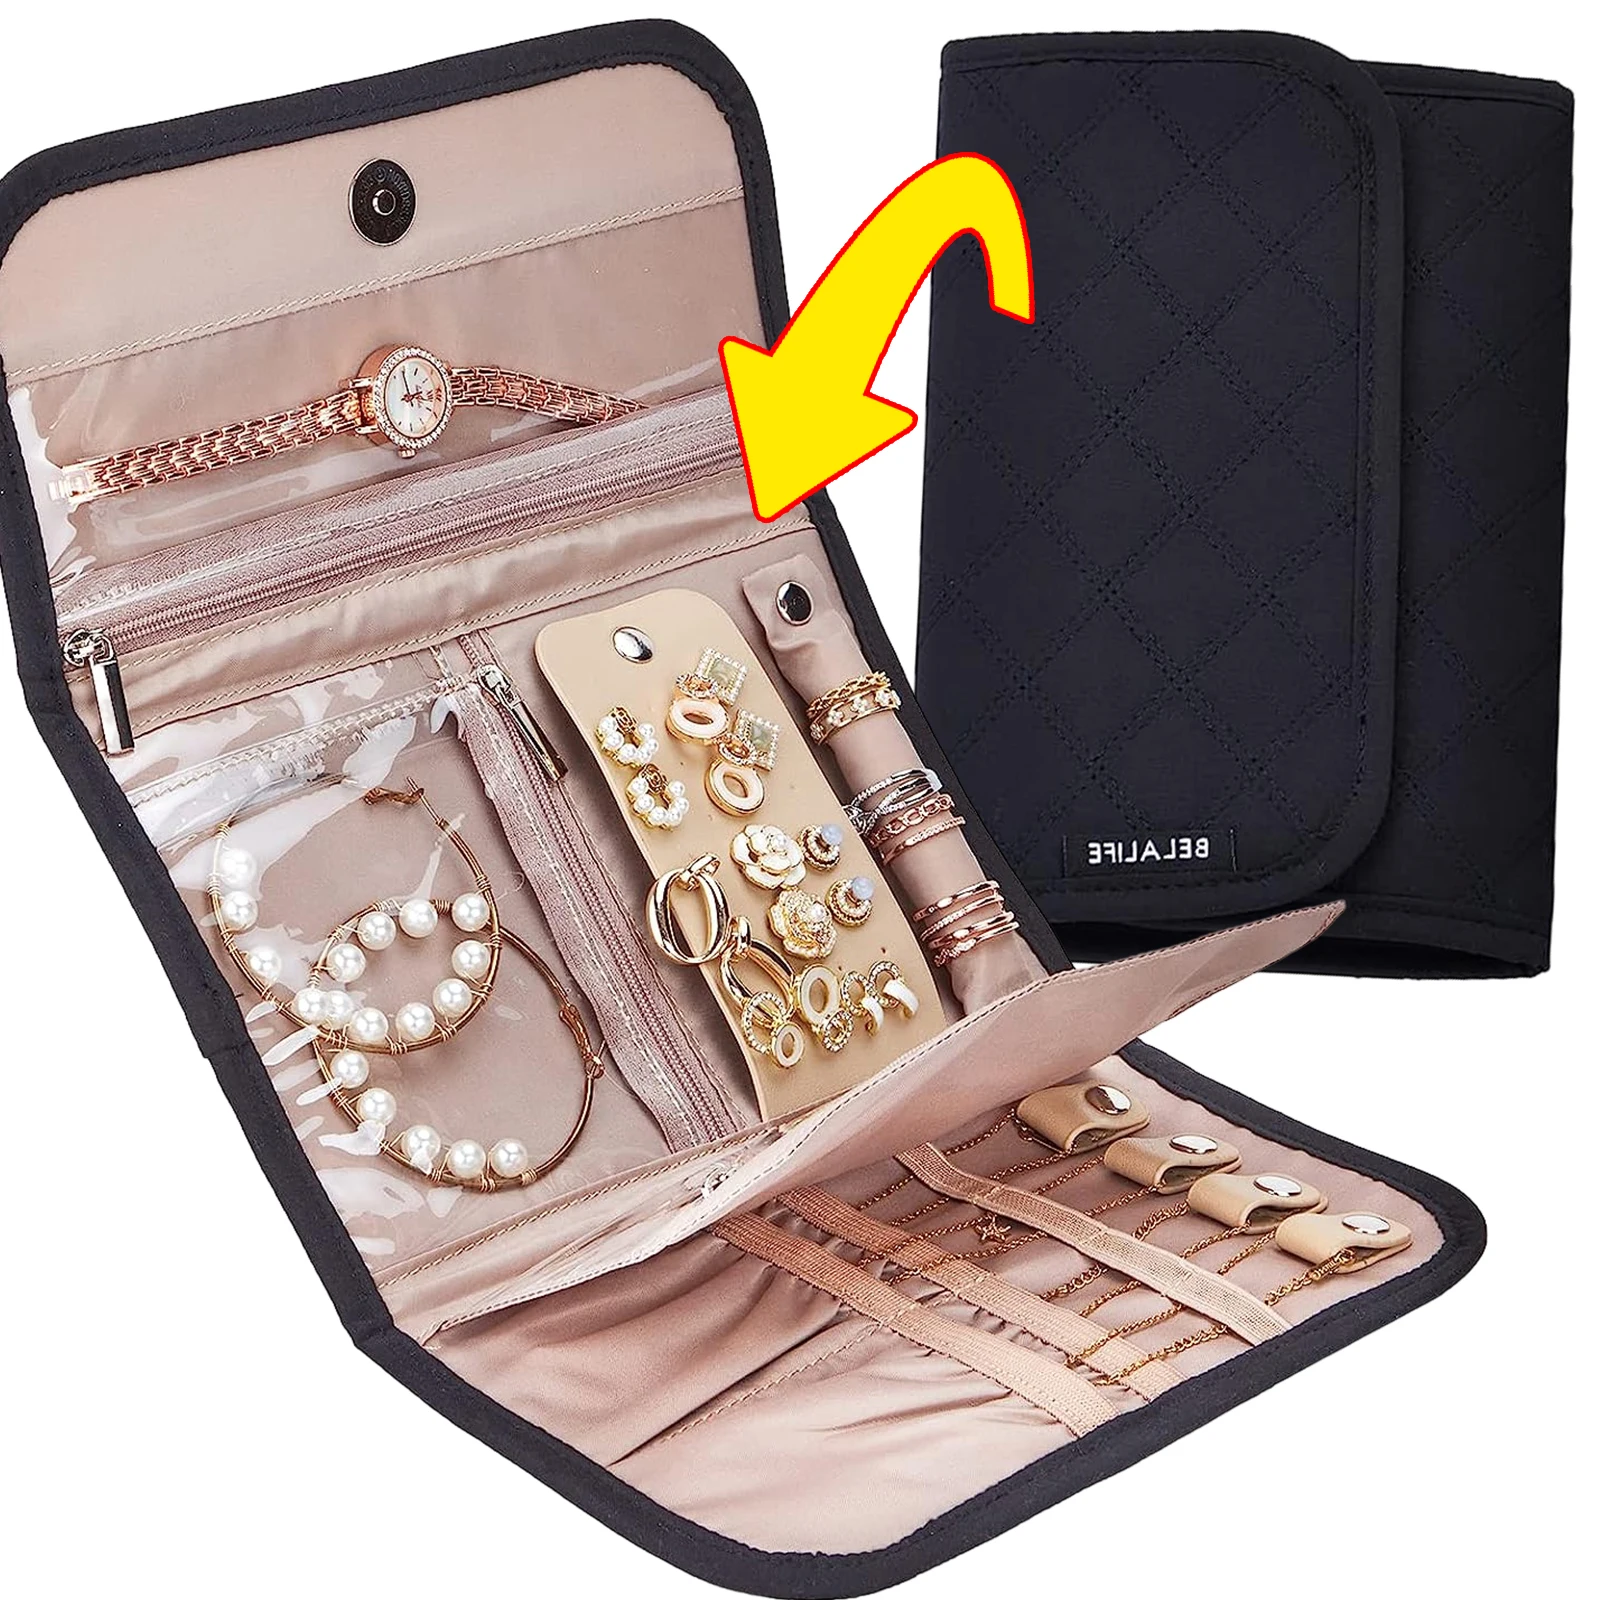 Roll Foldable Jewelry Case Travel Jewelry Organizer Portable for Journey Earrings Rings Diamond Necklaces Brooches Storage Bag mini plastic storage containers portable pill medicine storage transparent square boxes jewelry earrings rings packaging display